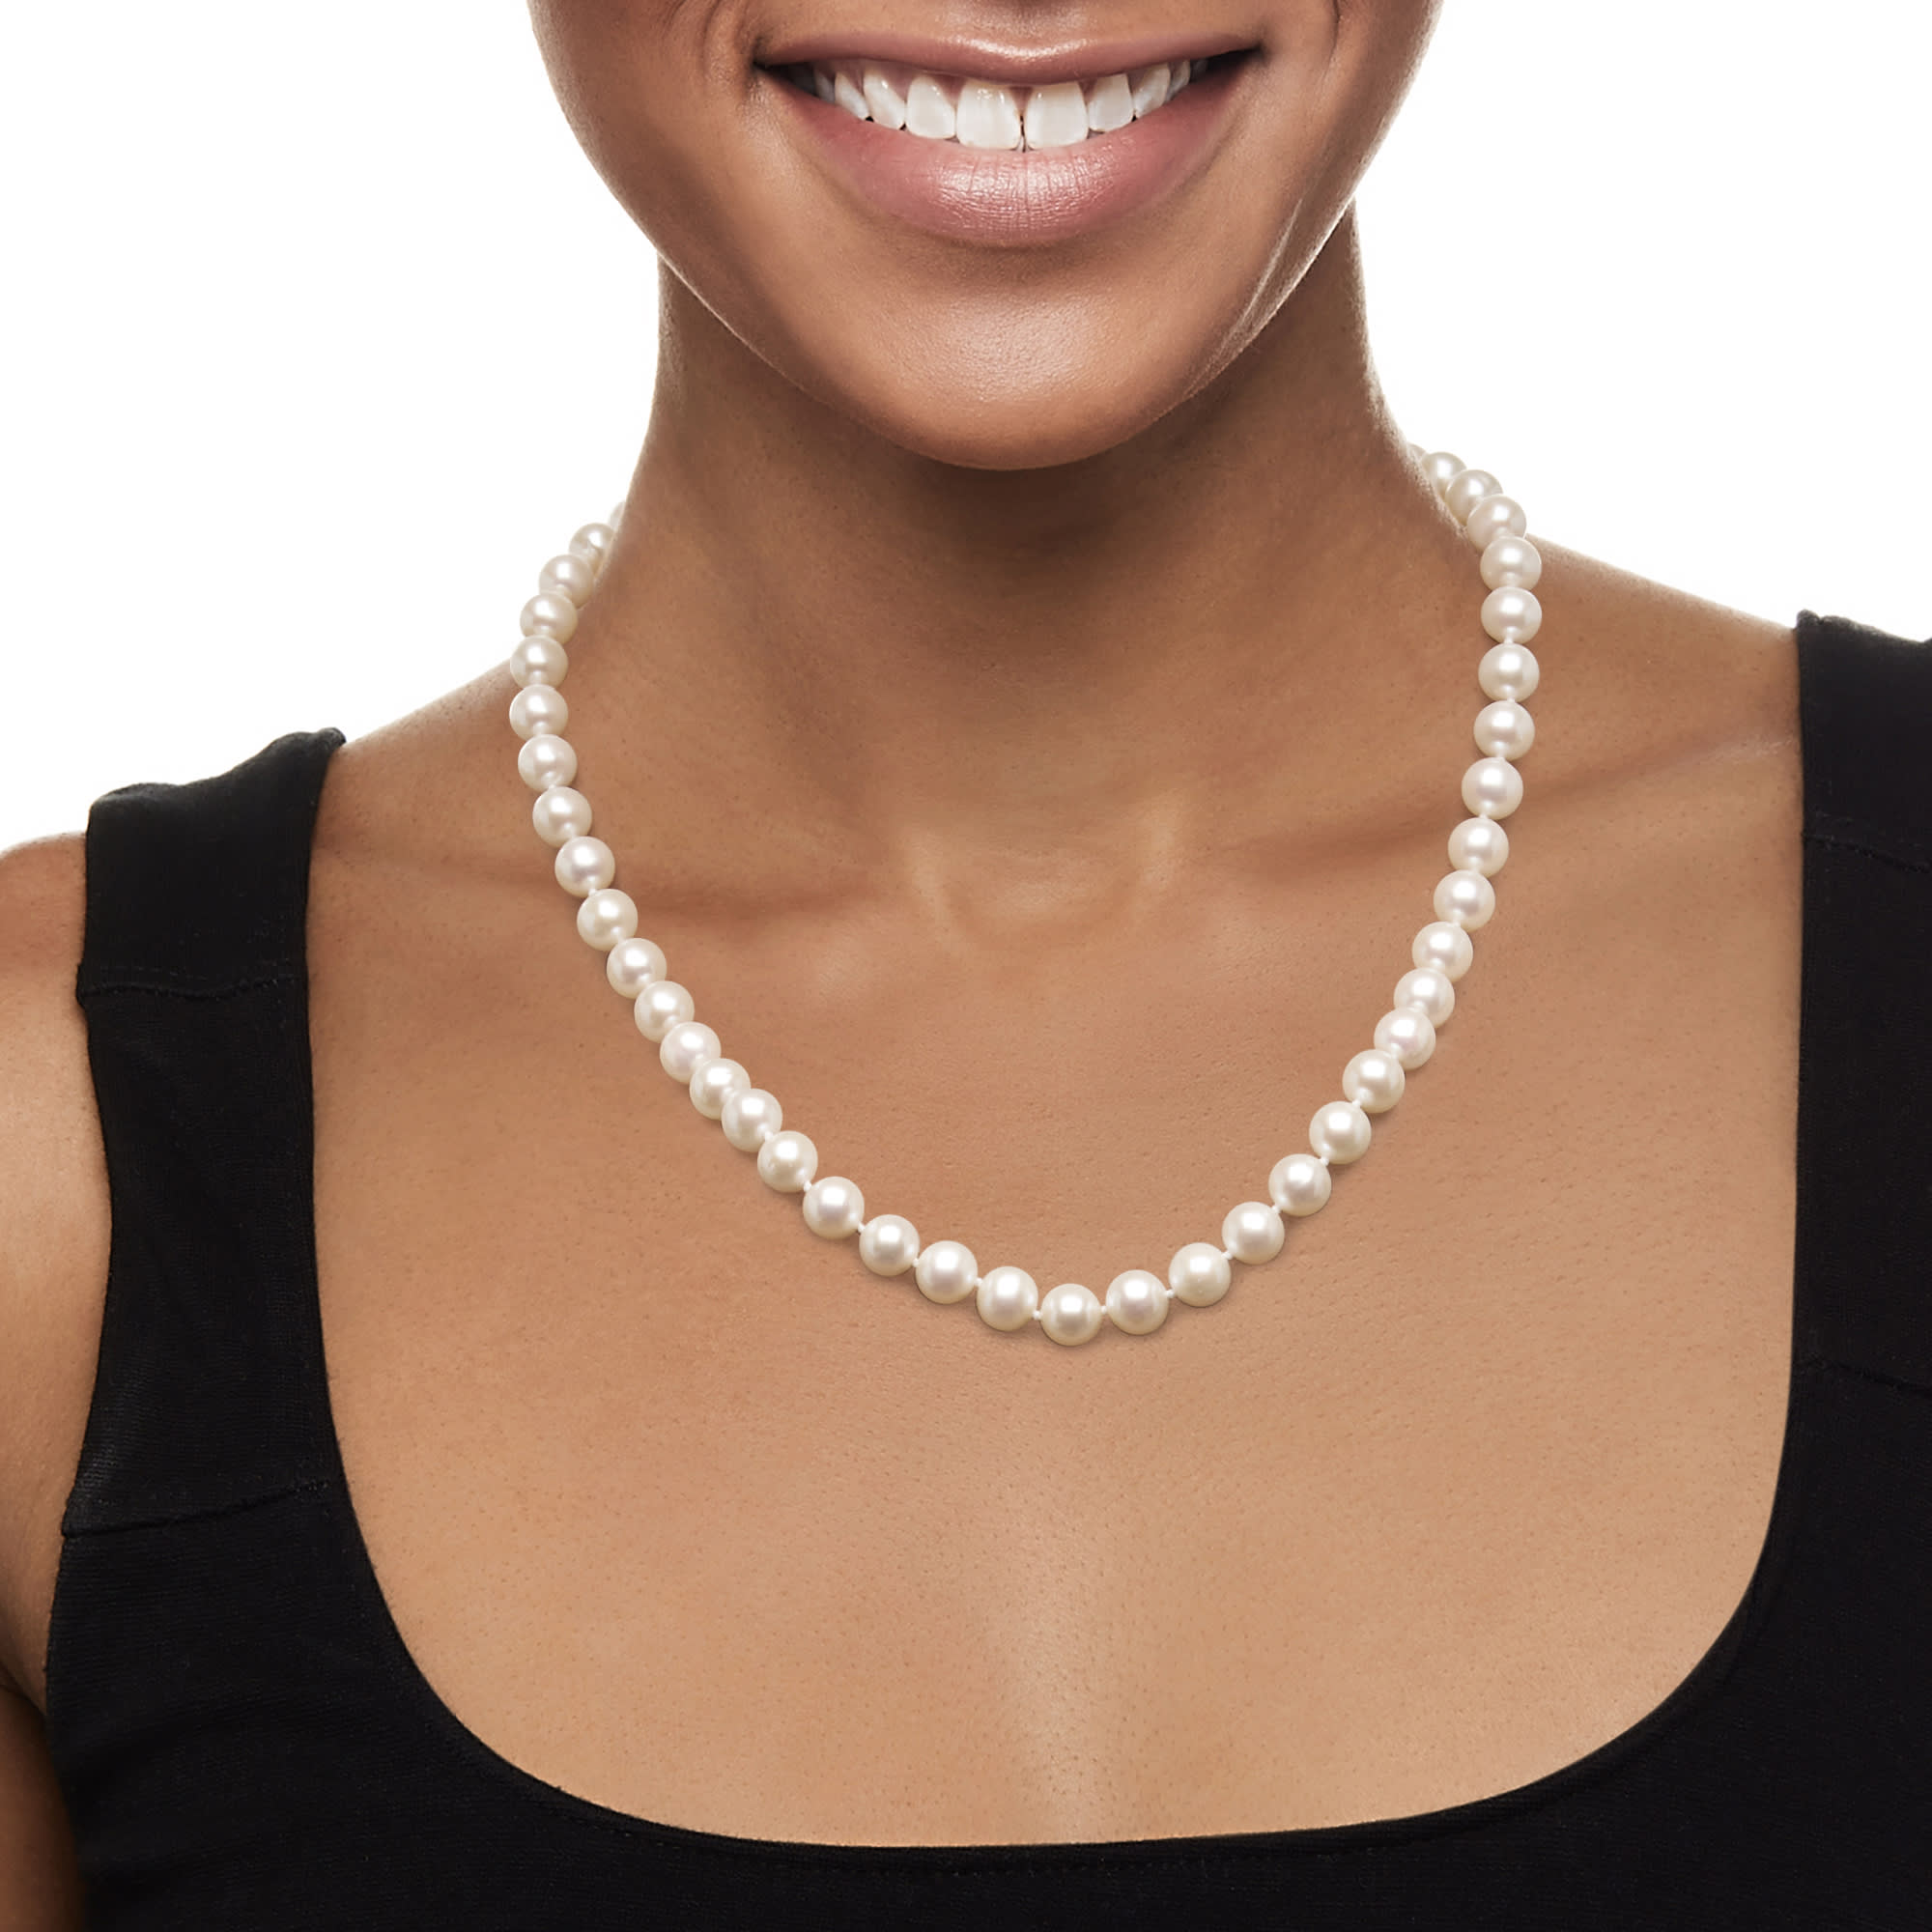 Women 99% 8inch Ladies Real Diamond Necklace Set, Size: 8 Inch